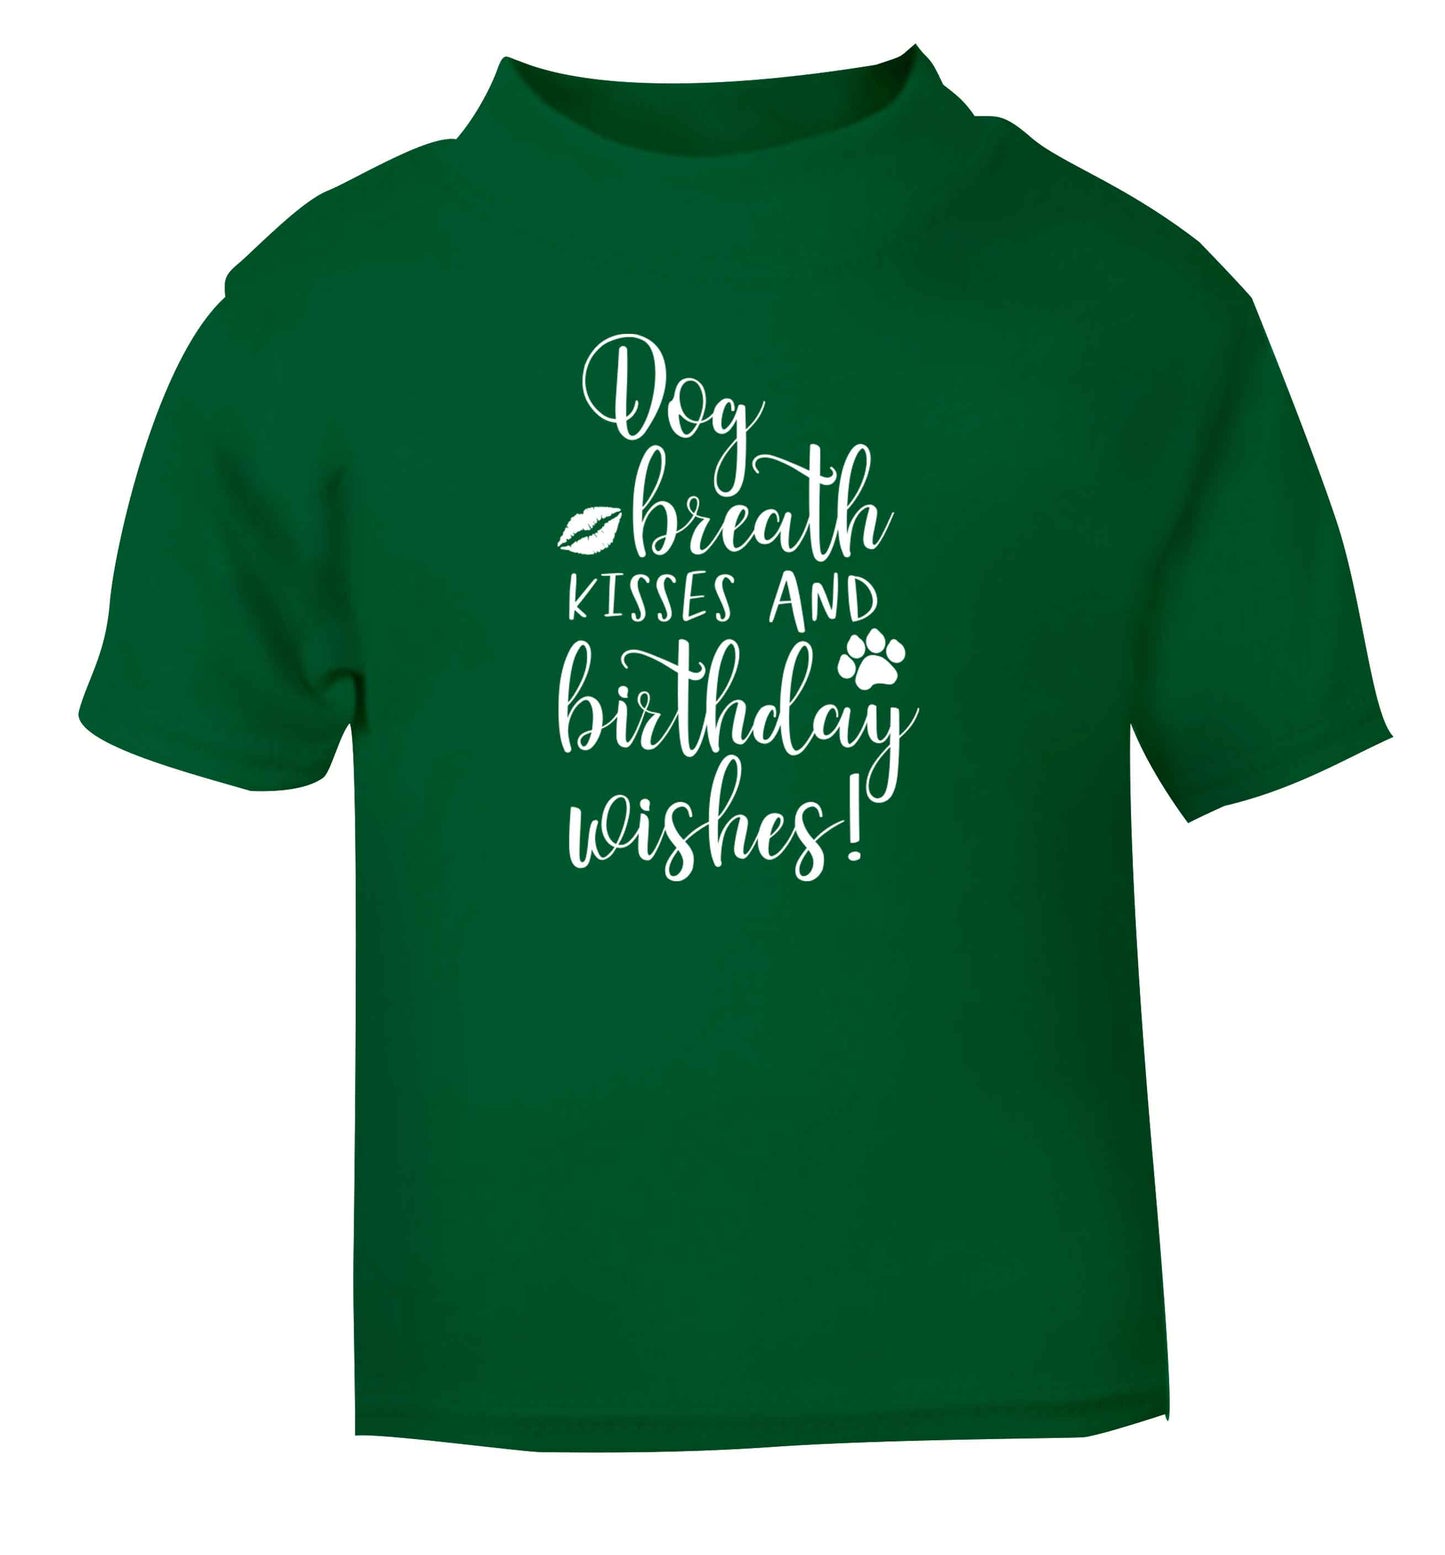 Dog breath kisses and christmas wishes green Baby Toddler Tshirt 2 Years